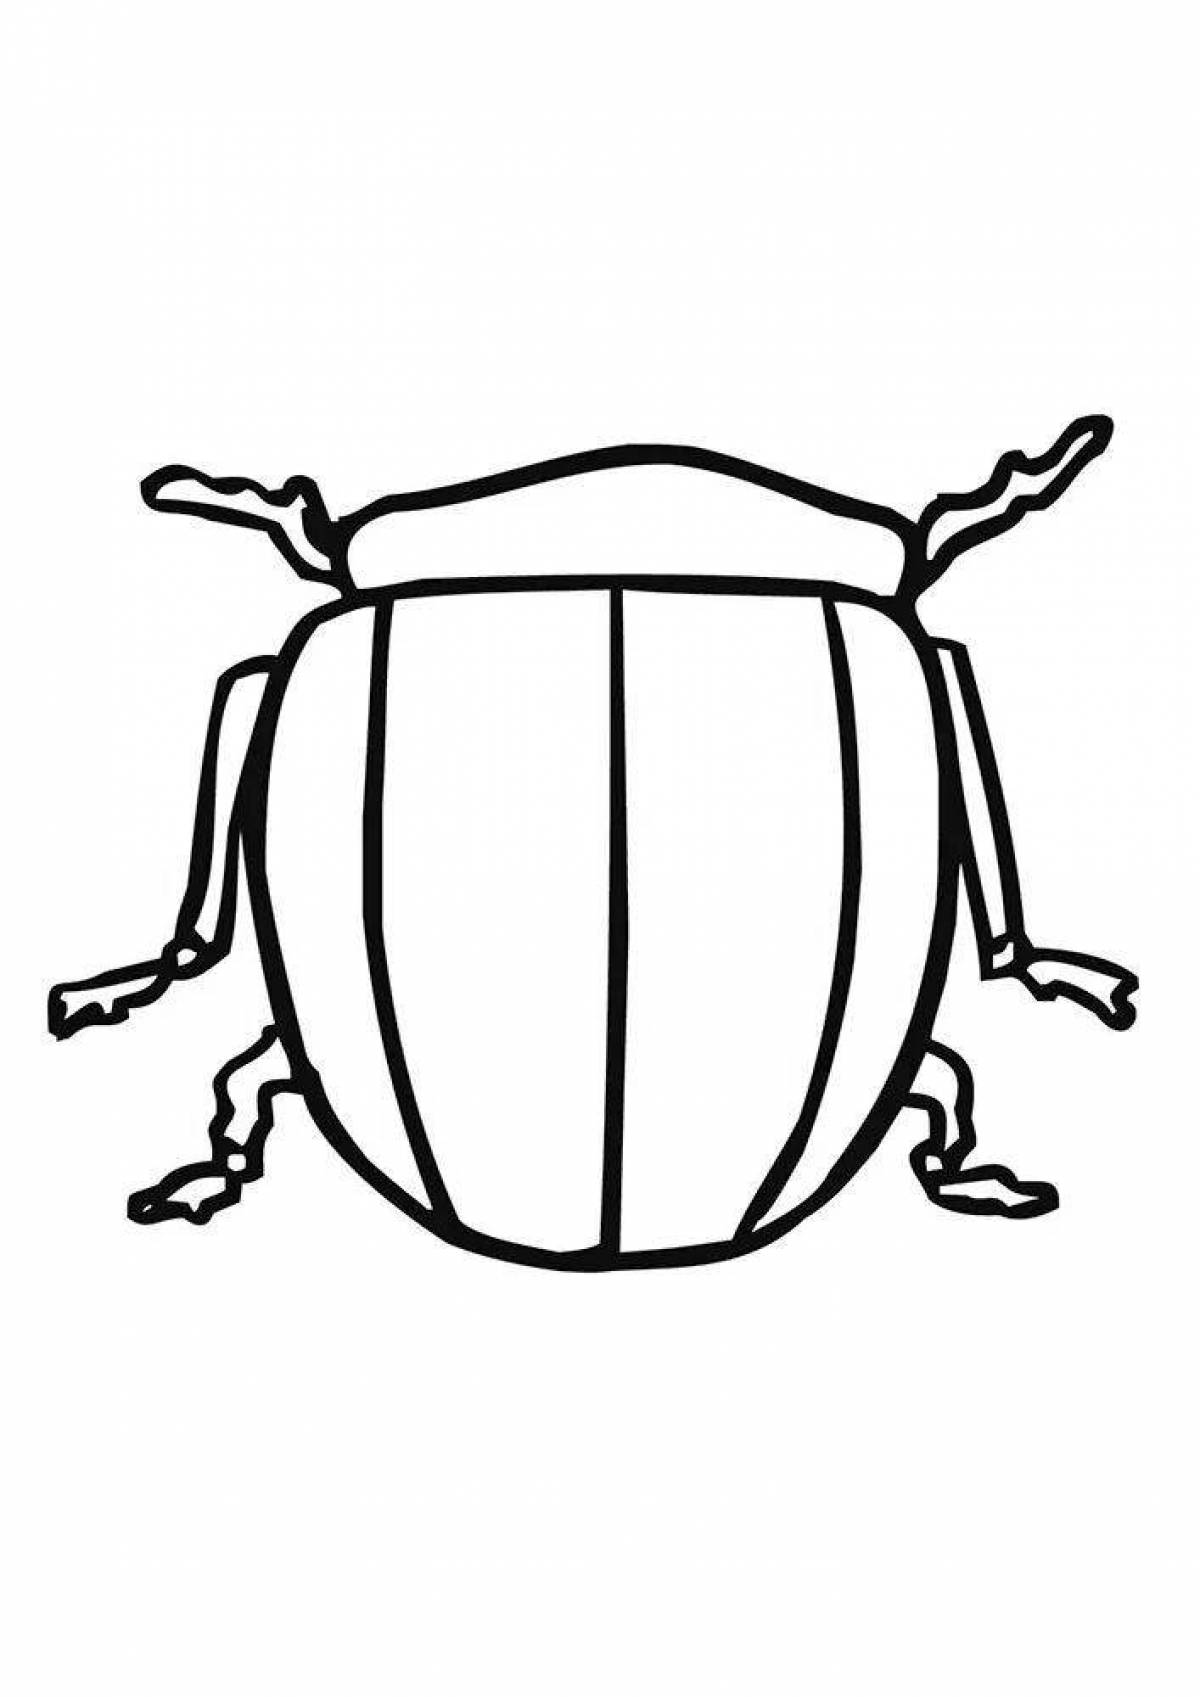 Beetle picture for kids #5